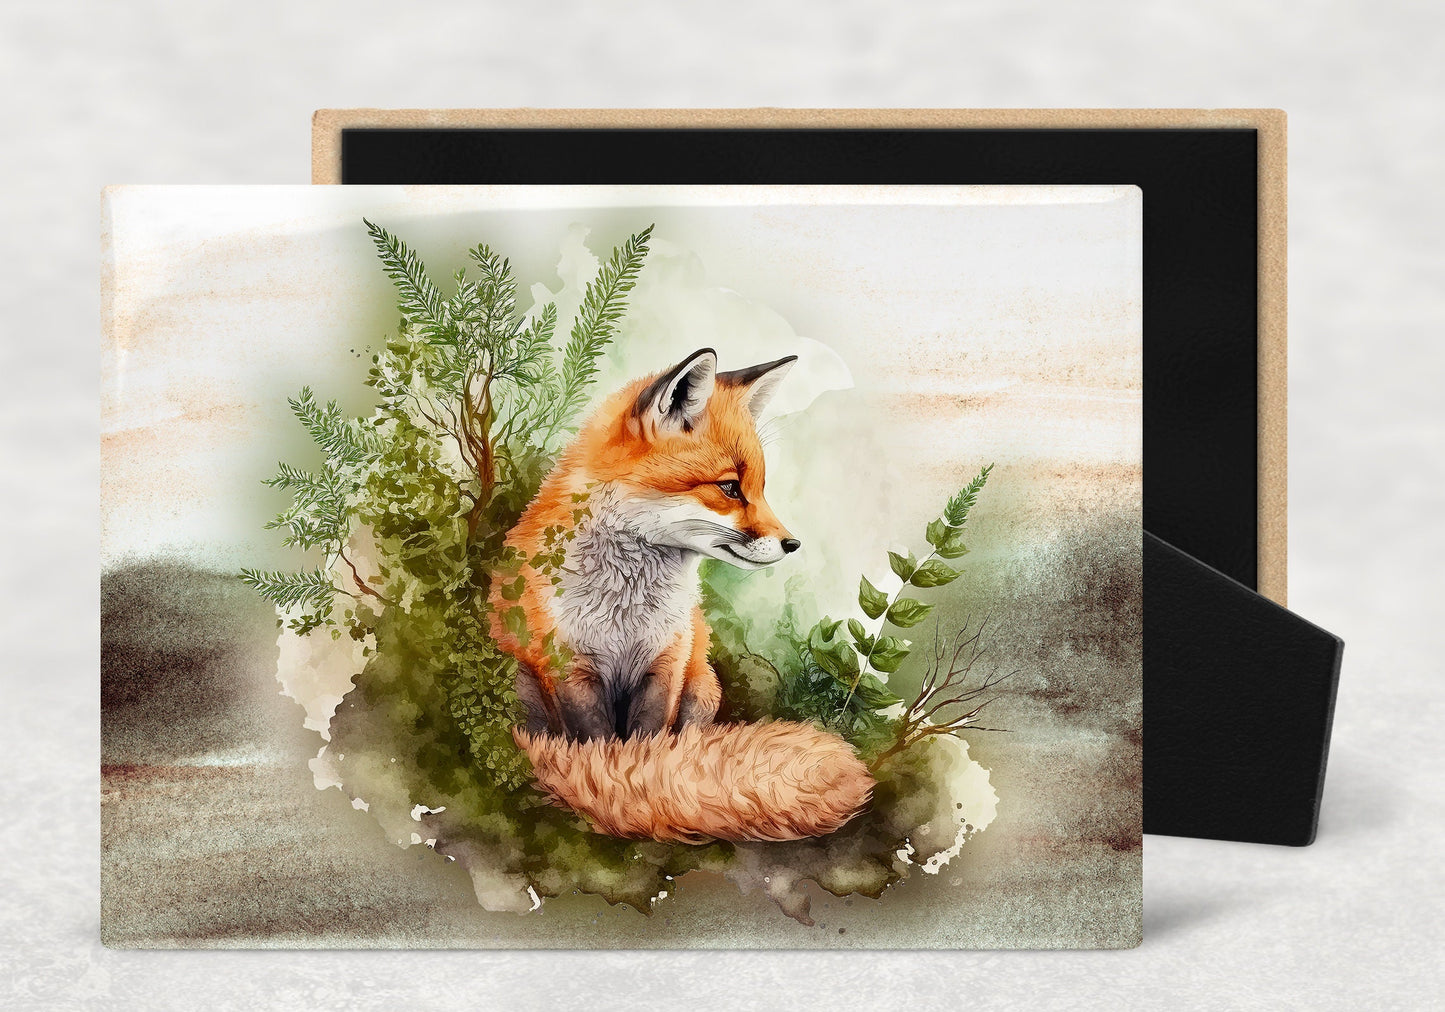 Cute Watercolor Fox Art Decorative Ceramic Tile with Optional Easel Back - 6x8 inches